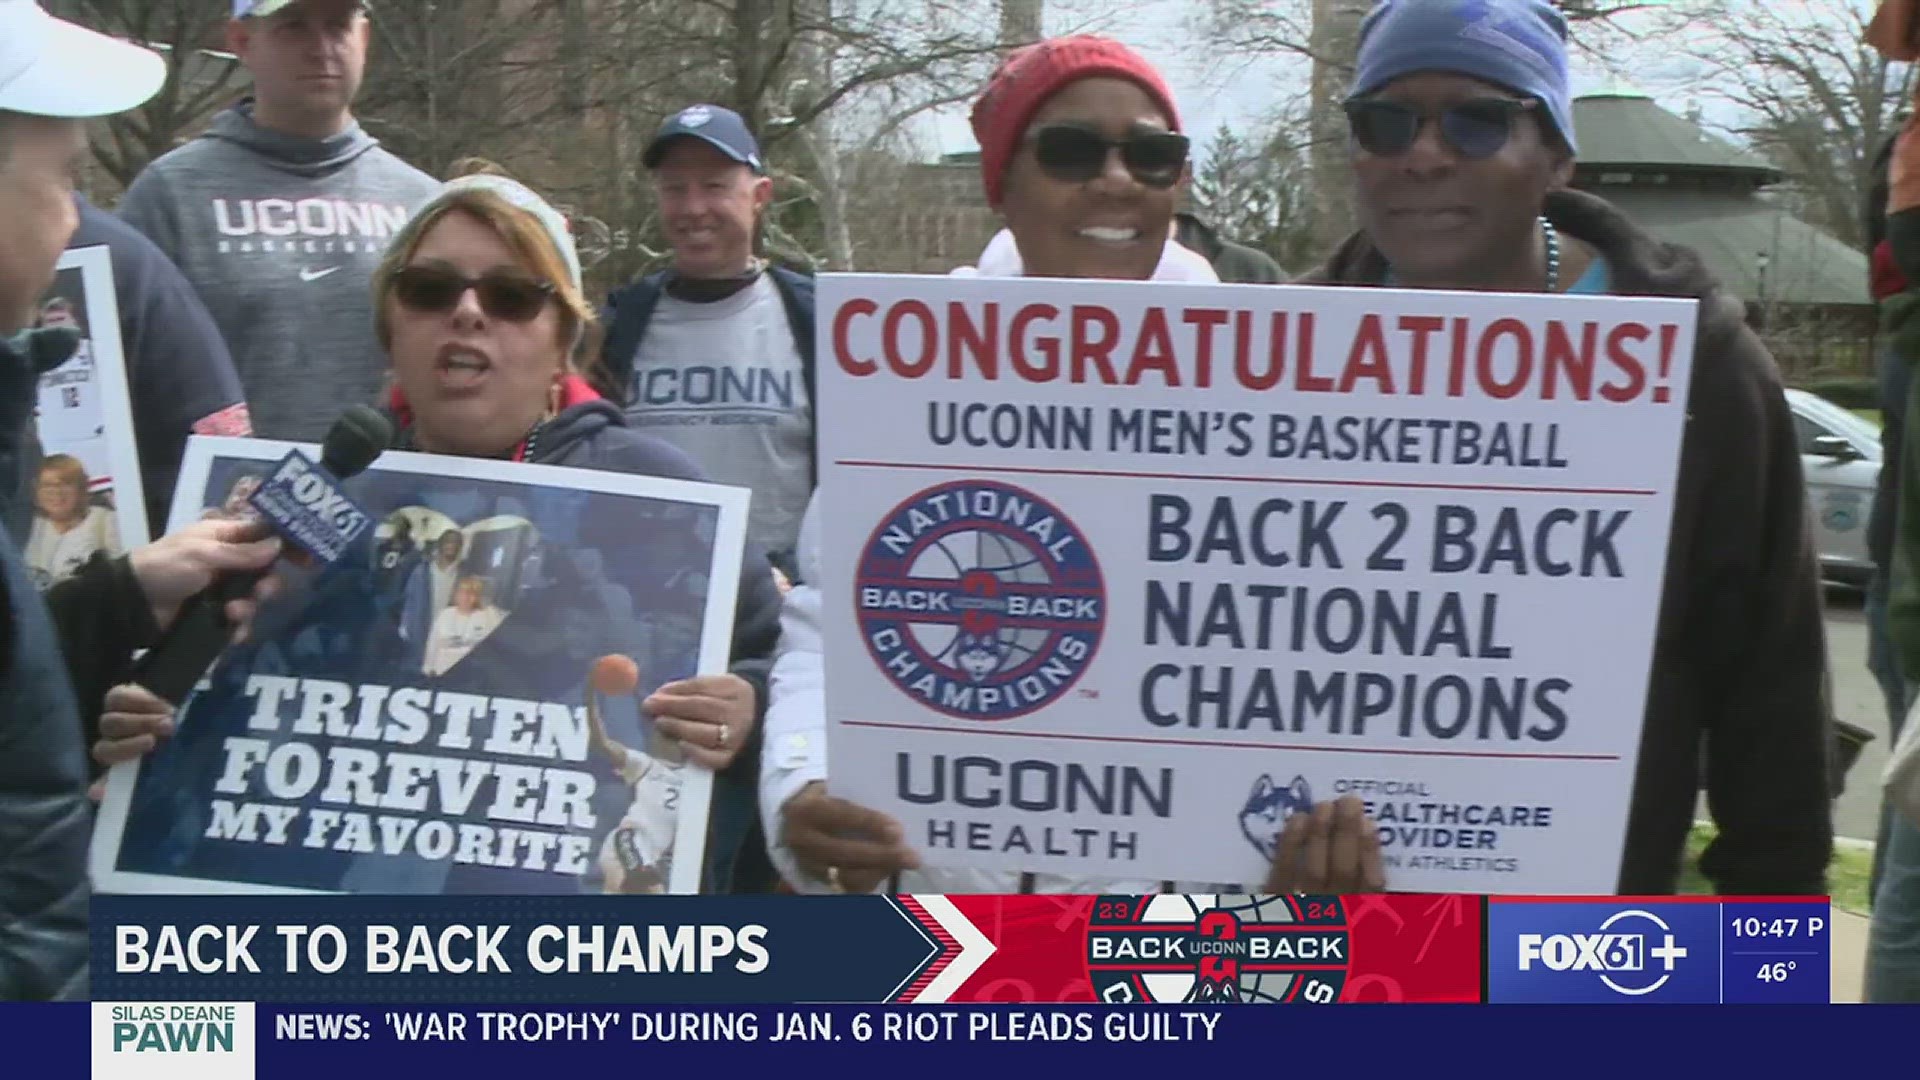 FOX61's Jimmy Altman interviewed spectators at UConn's victory parade on Saturday.